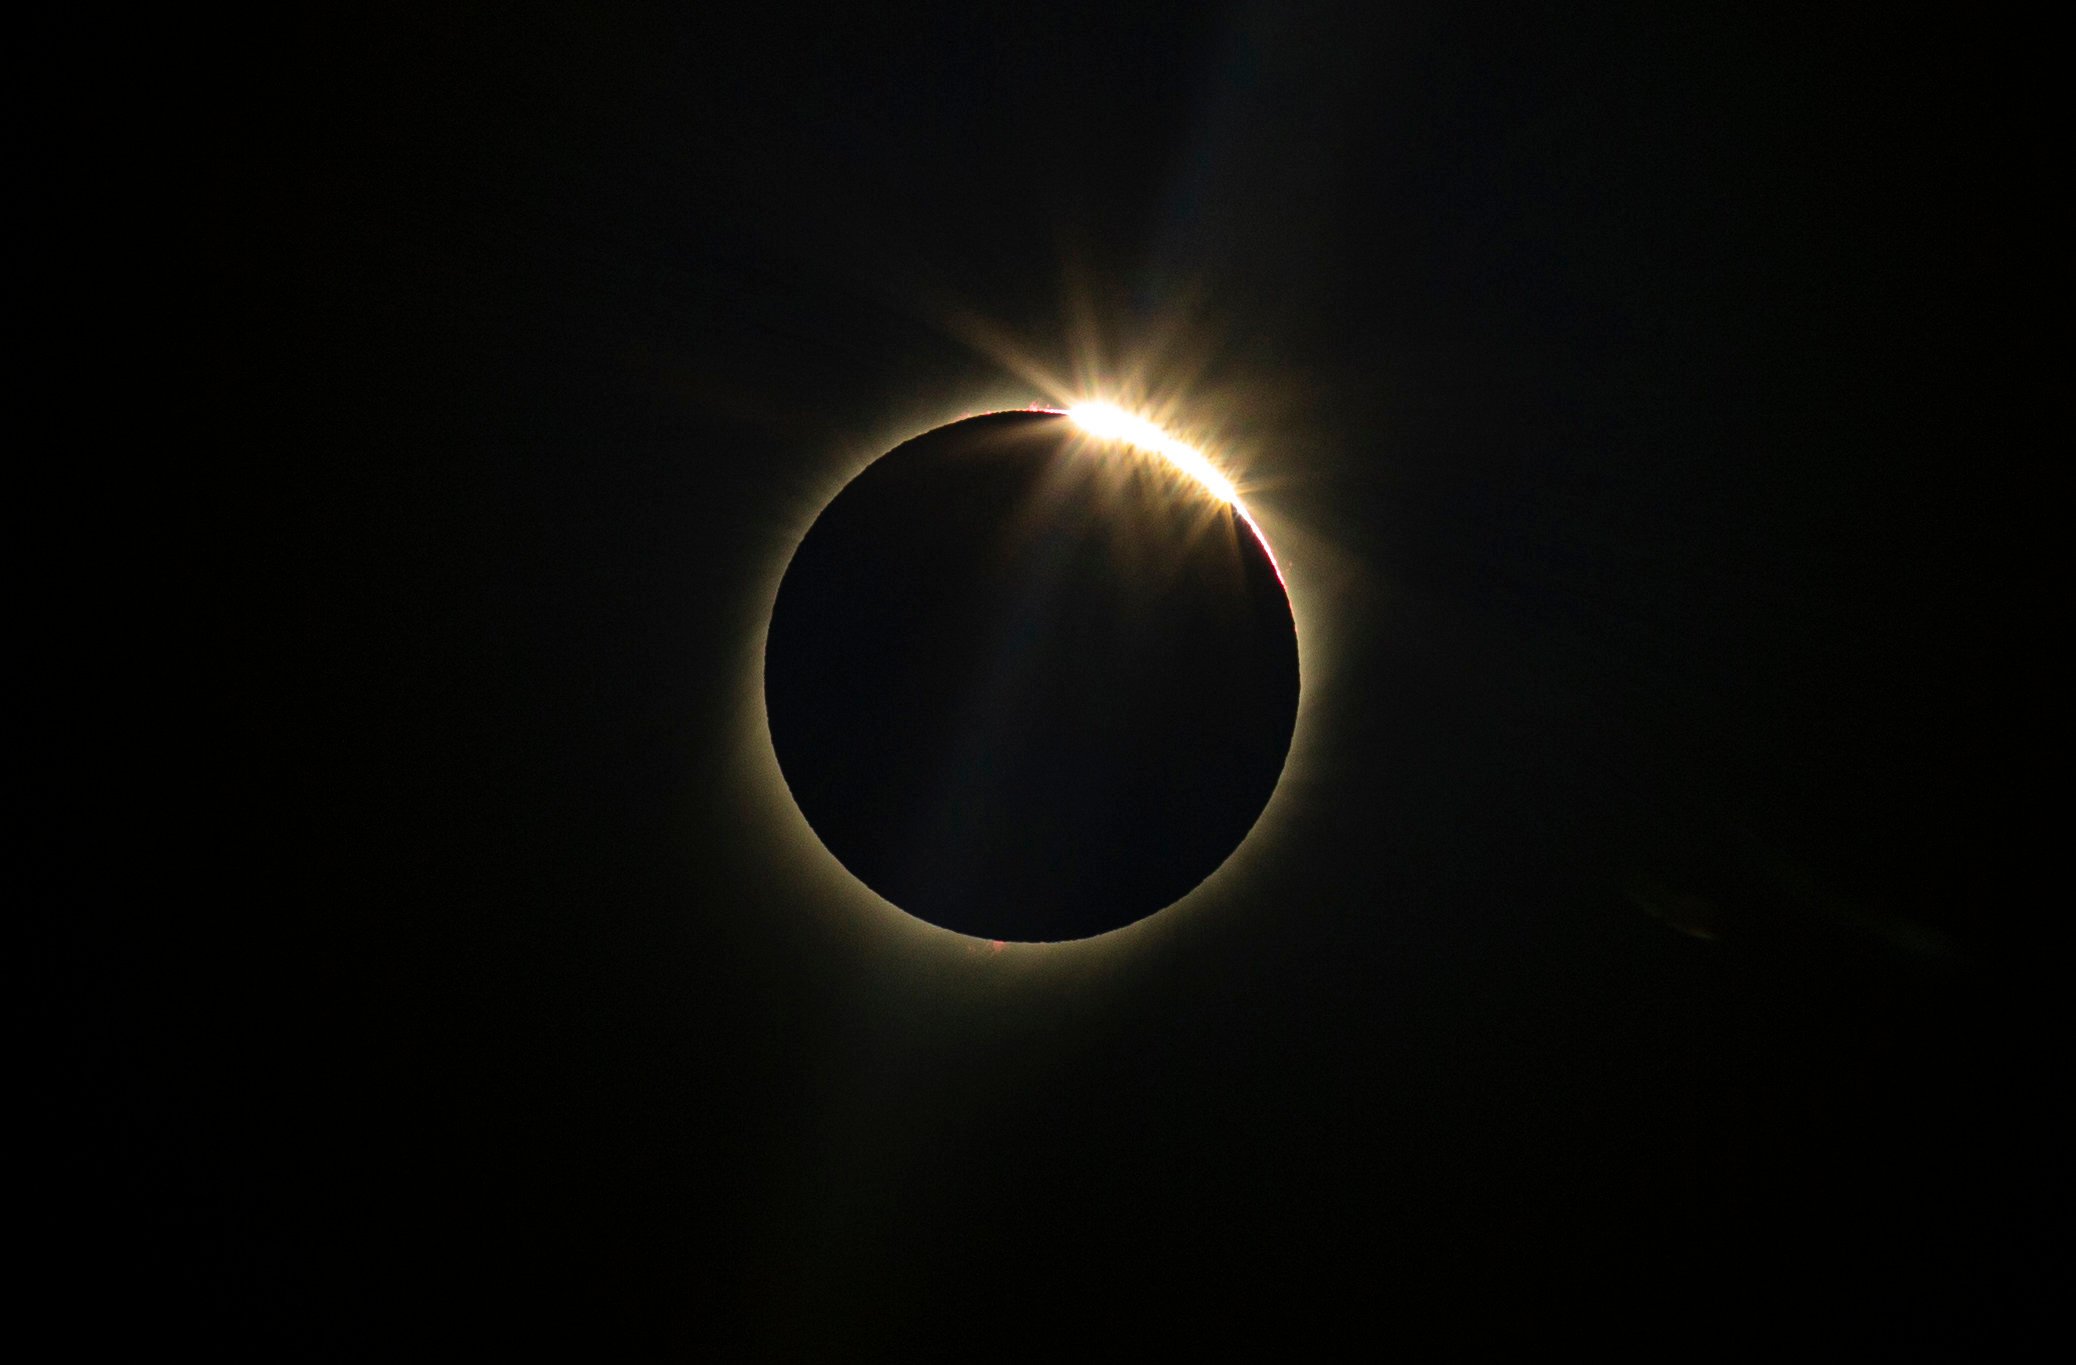 Ring of fire': Rare solar eclipse to dim skies over Africa, Asia ...